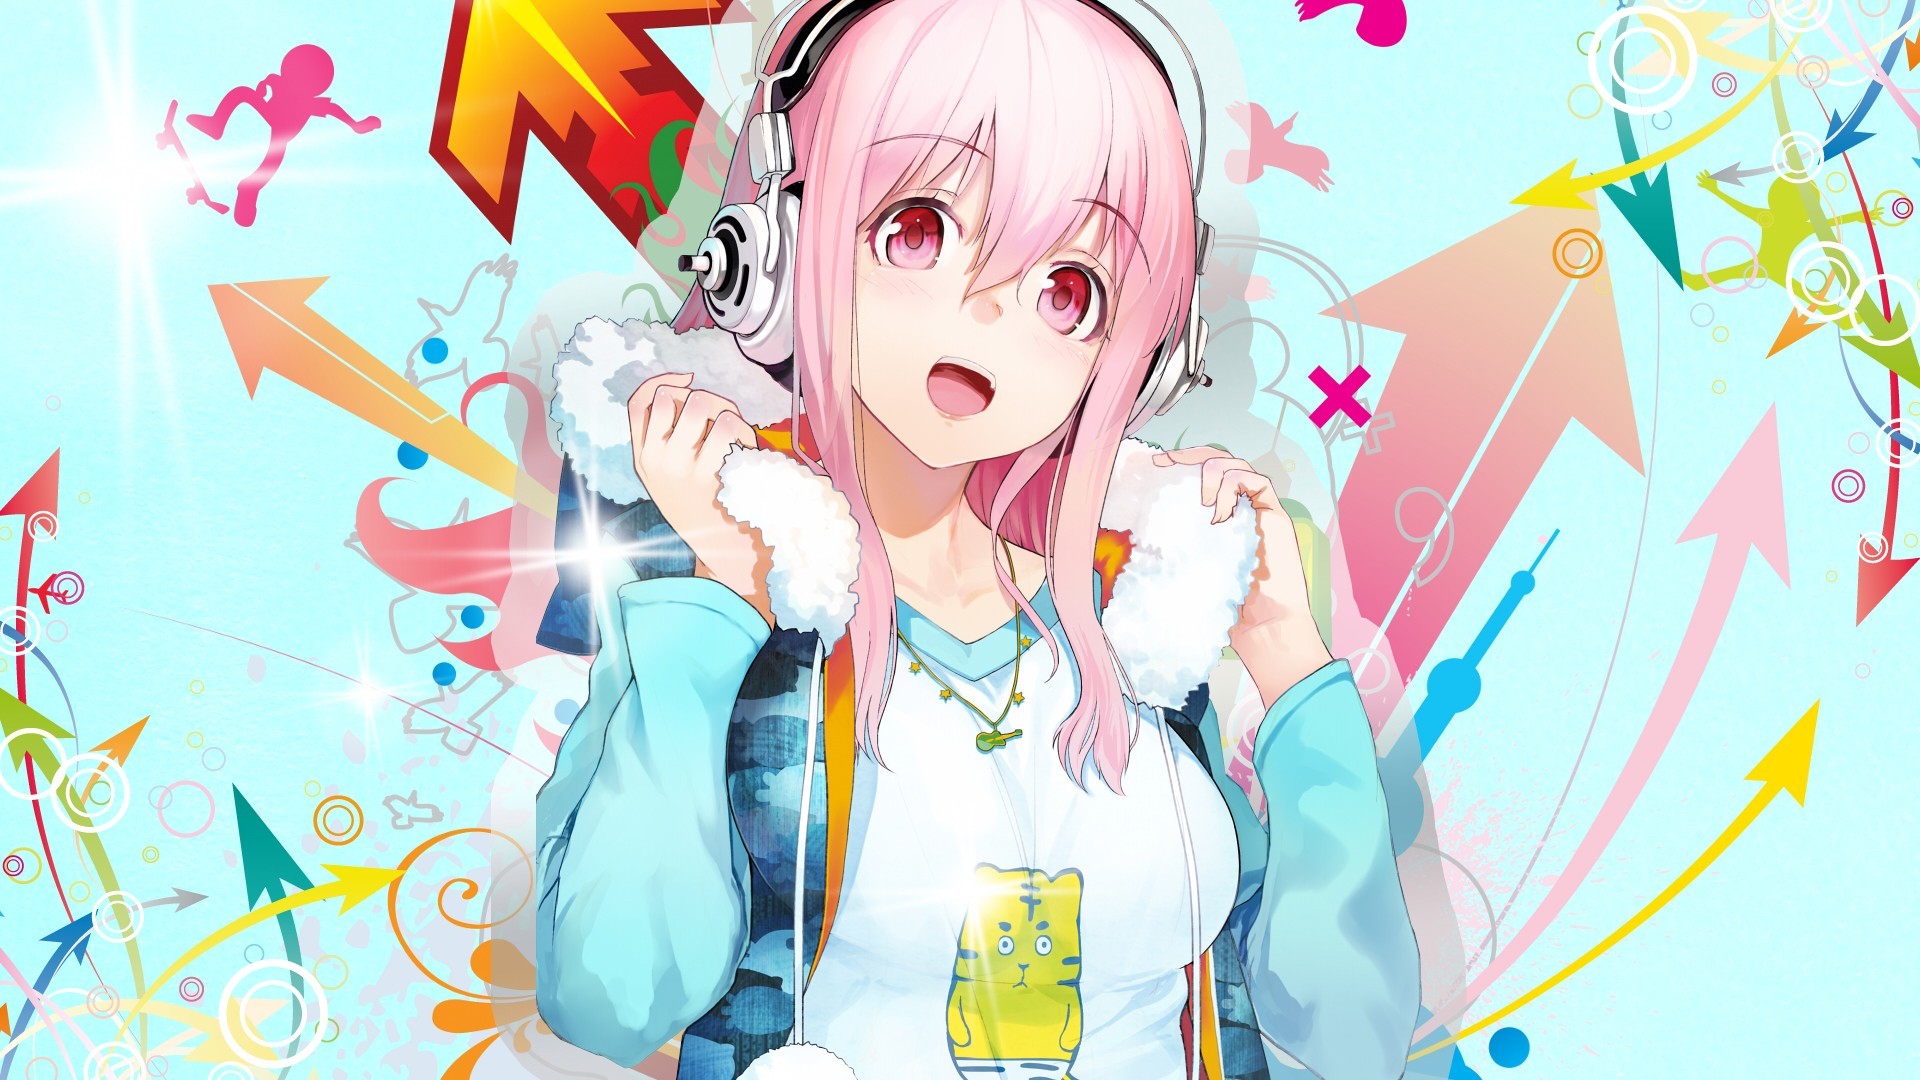 PC Wallpaper Super Sonico, Headphones, Pink Hair for Desktop / Mac, Laptop,  Smartphones and tablets with different resolutions.